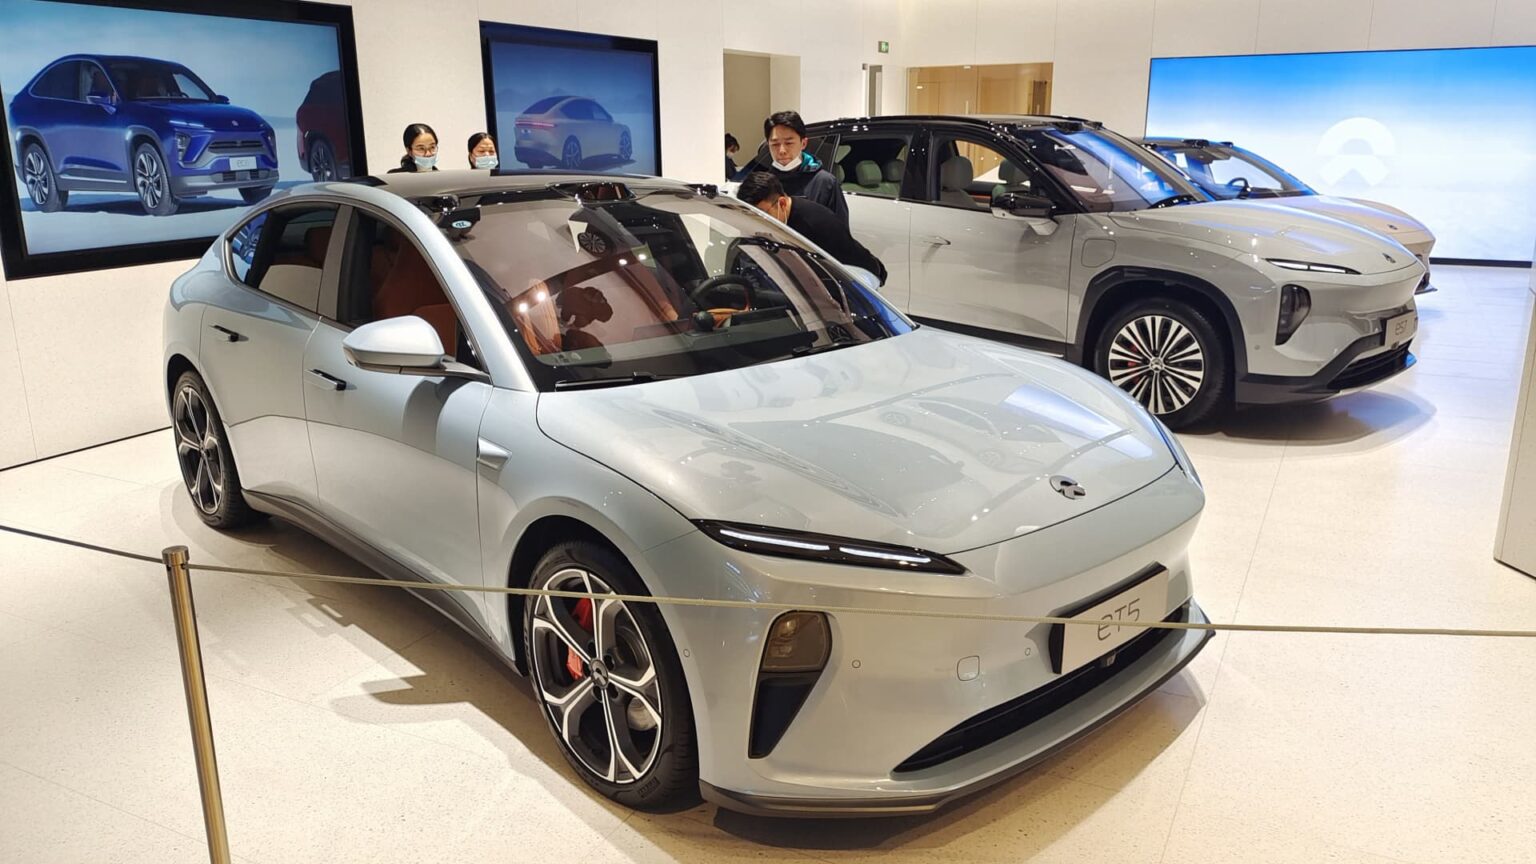 Nio says it won’t join the “price war” and slash